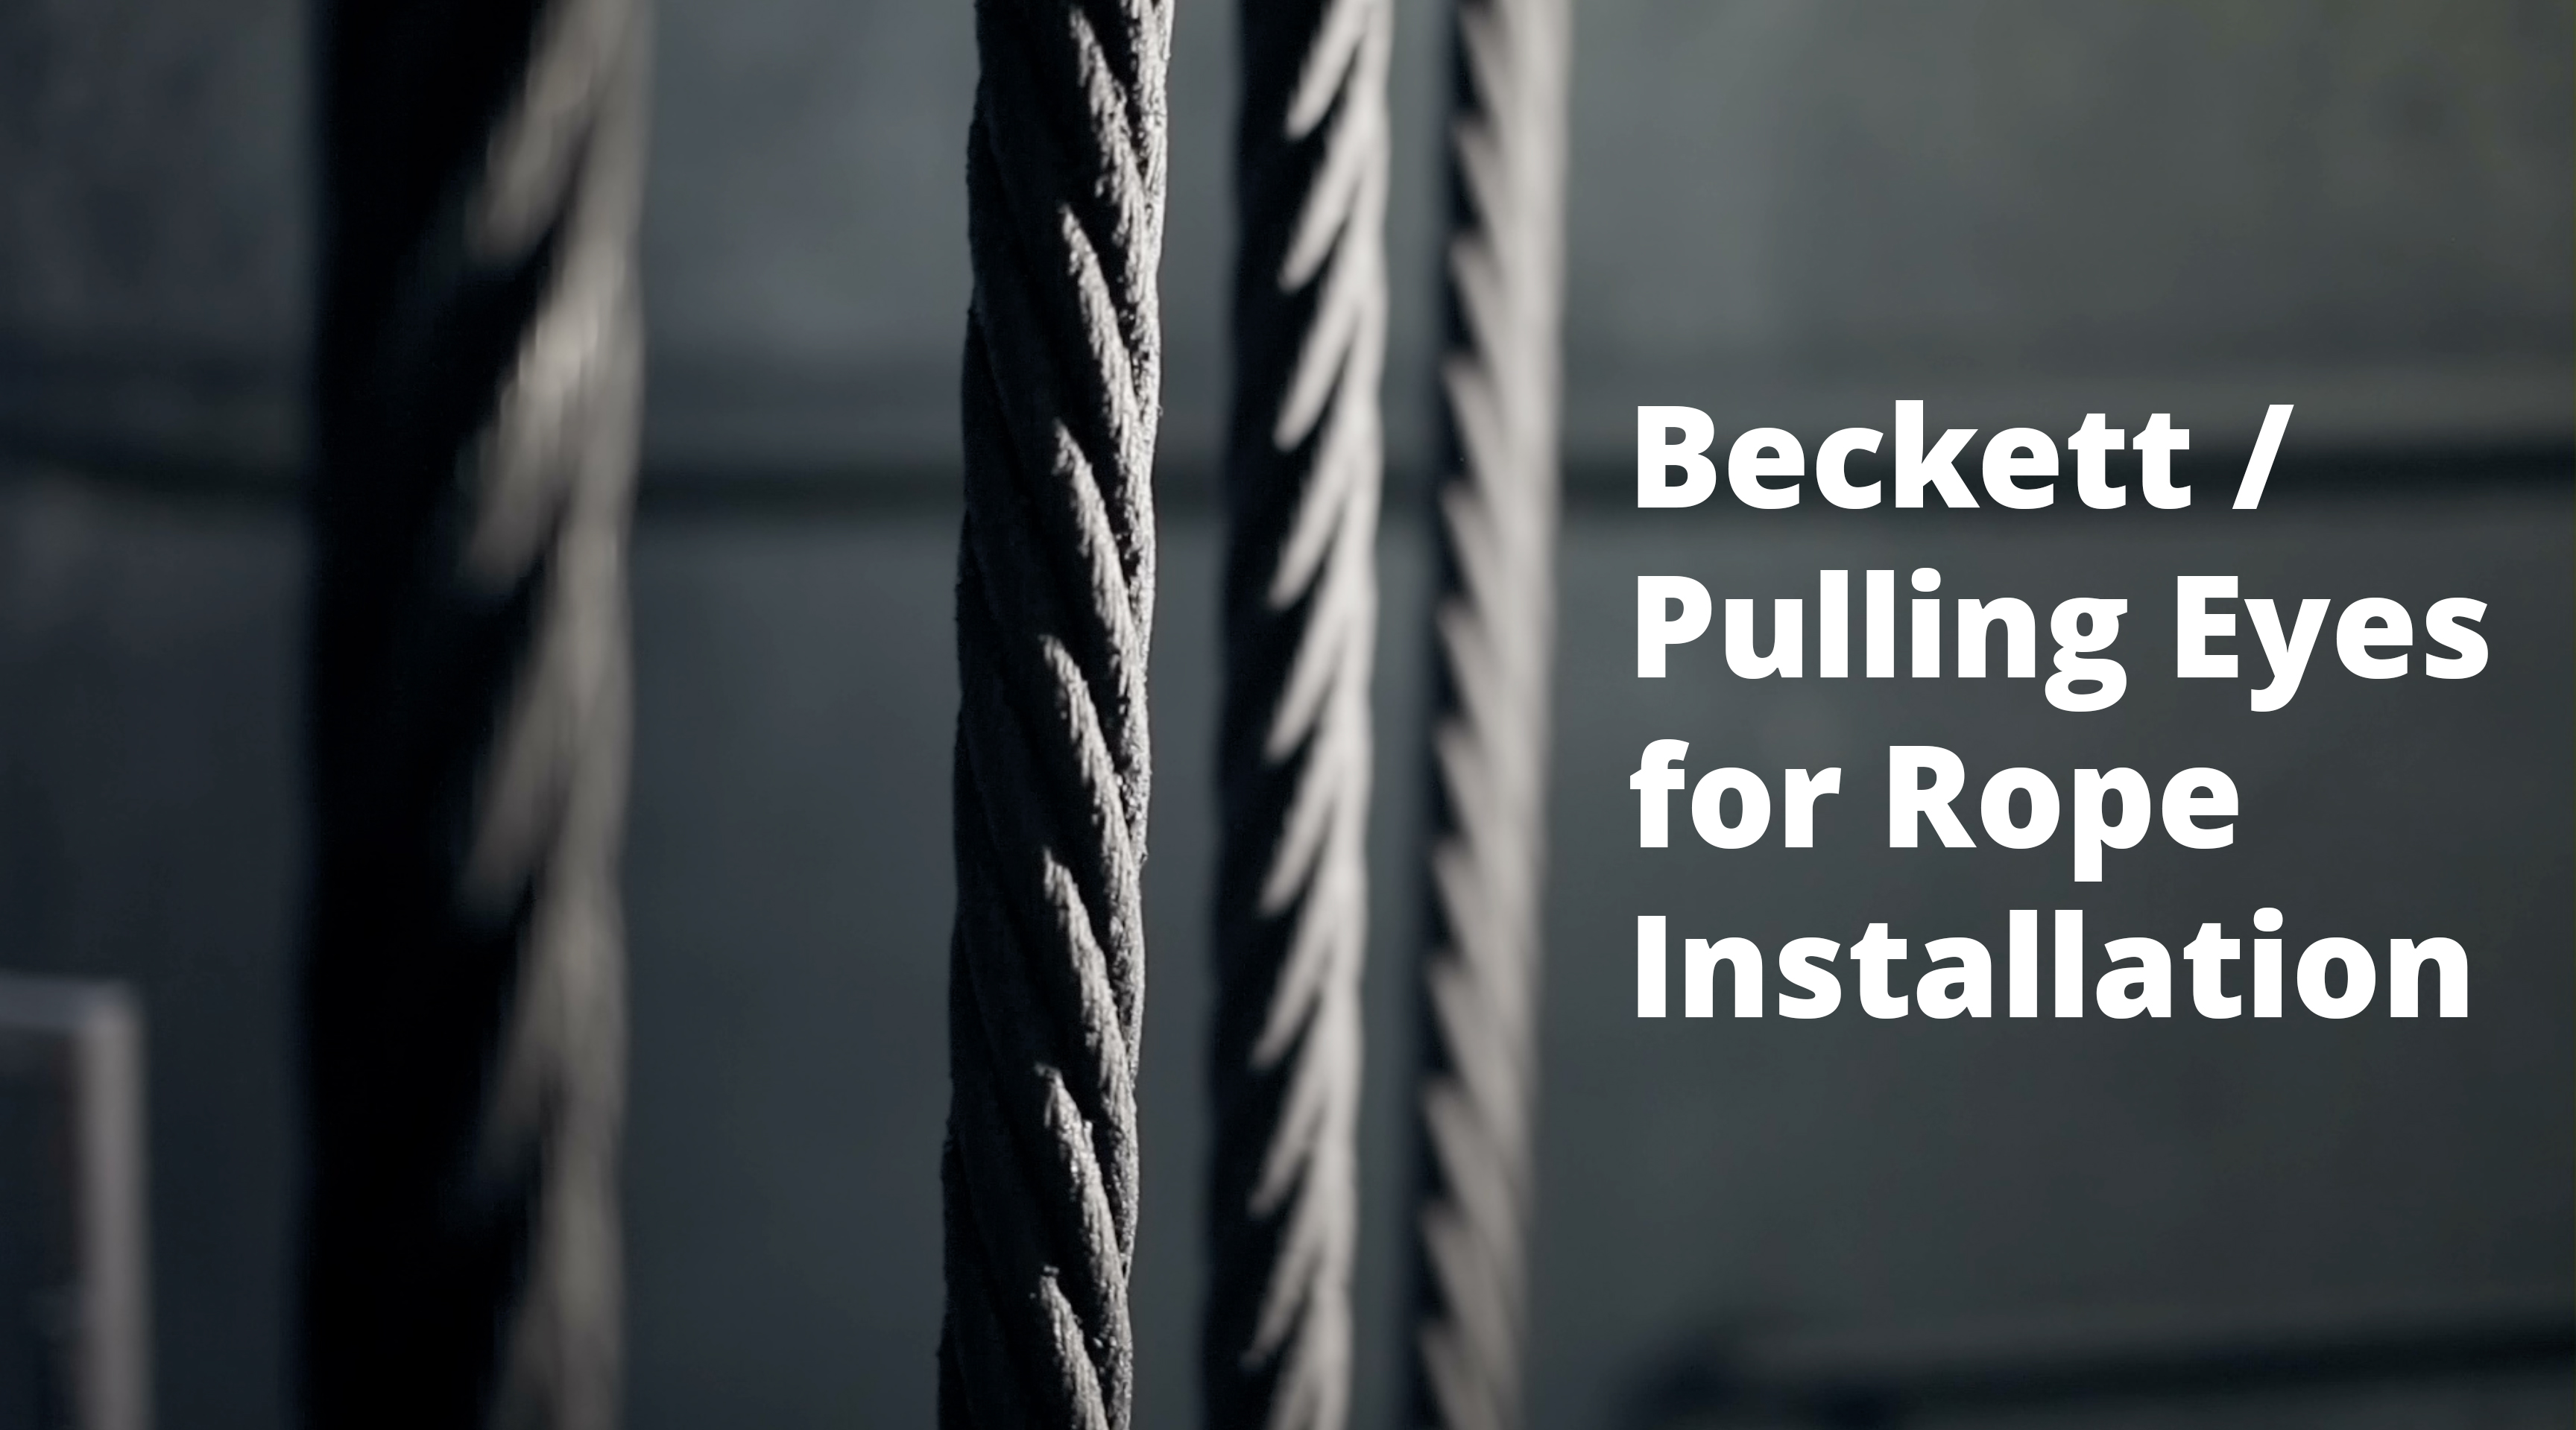 Thumbnail image for the podcast "Beckett / pulling eyes for rope installation" featuring an image of steel wire rope & text containing the podcast title.